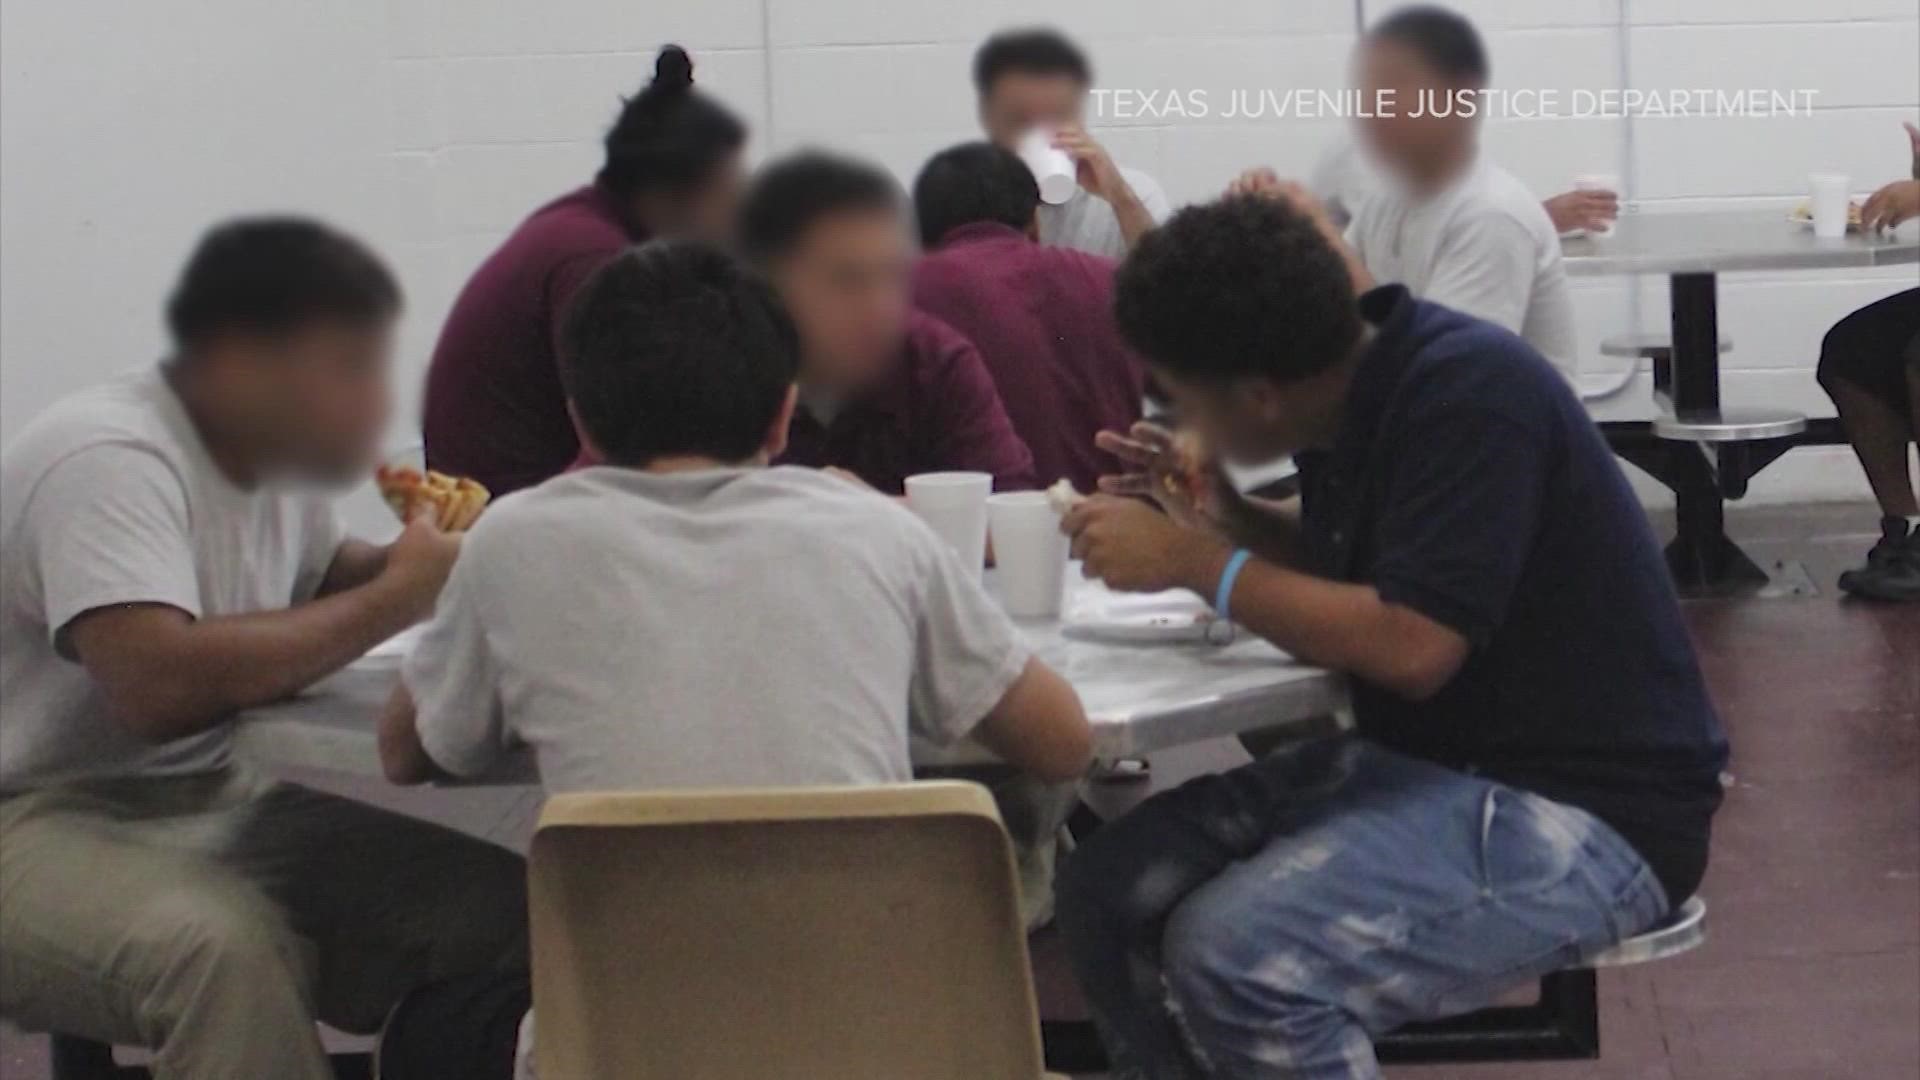 Conditions are so bad in some juvenile facilities that some kids have been forced to urinate in water bottles.